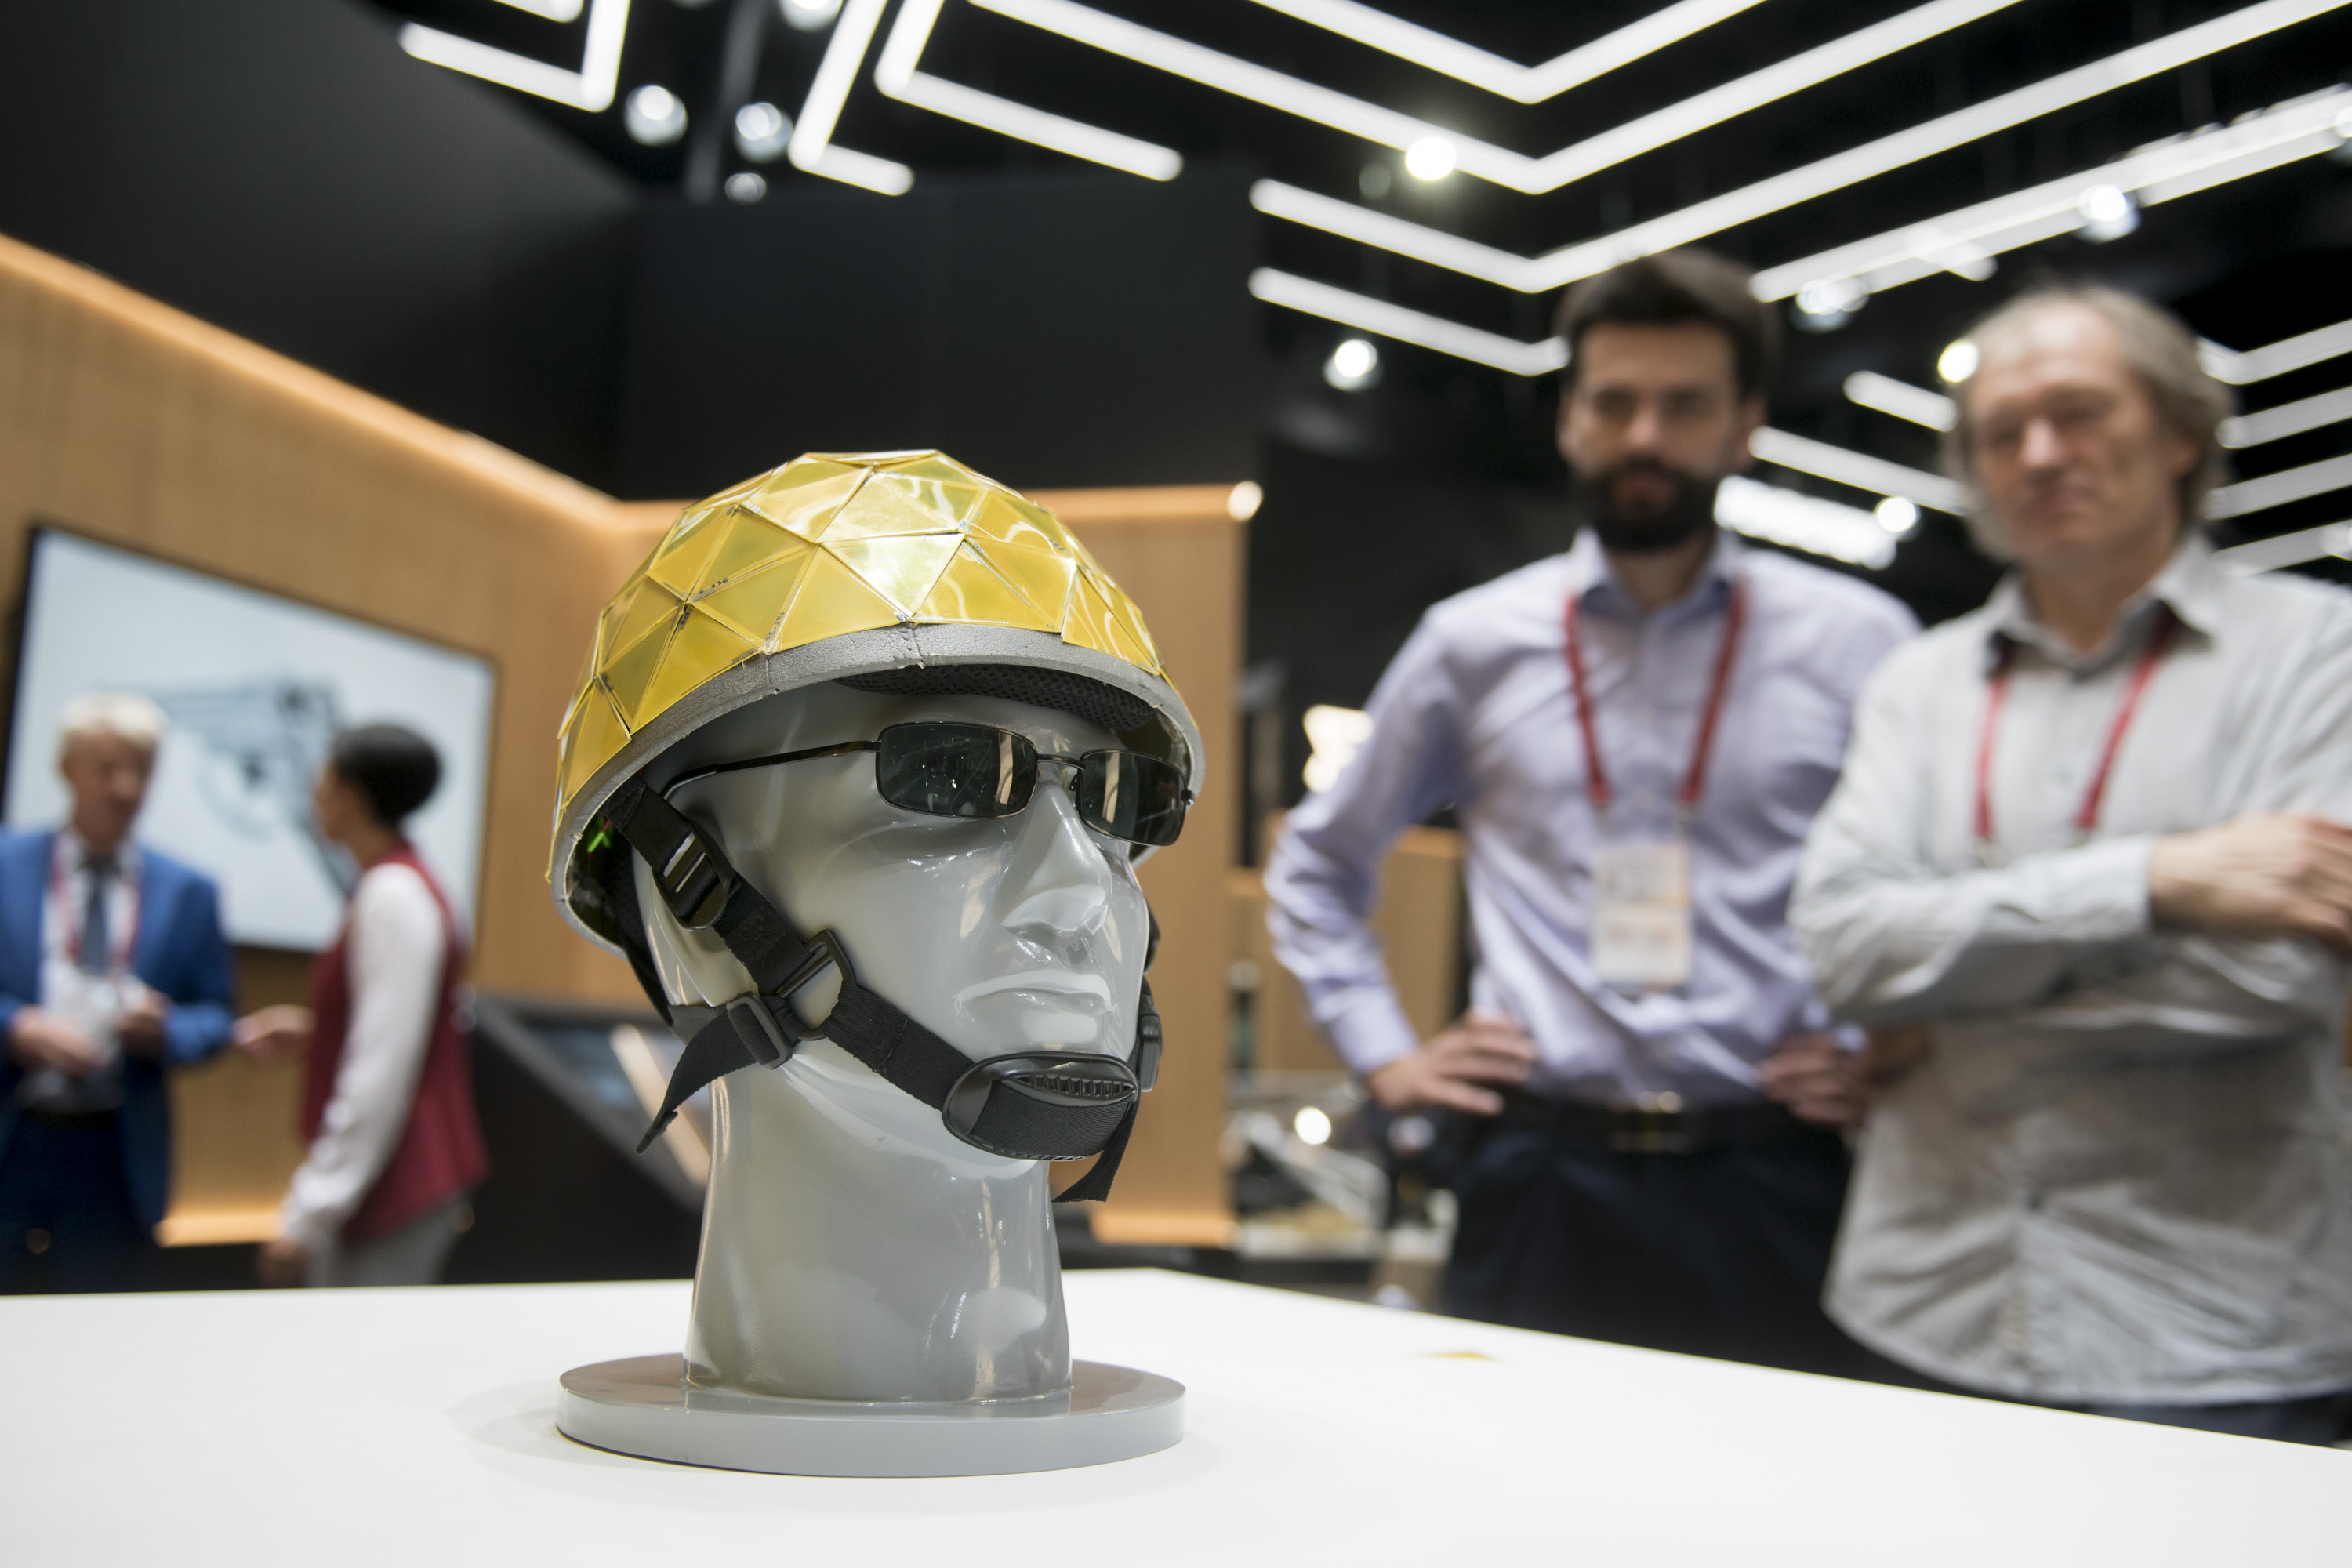 Rostec Presents Chameleon Helmet to Equip the "Soldier of the Future" at Army 2018